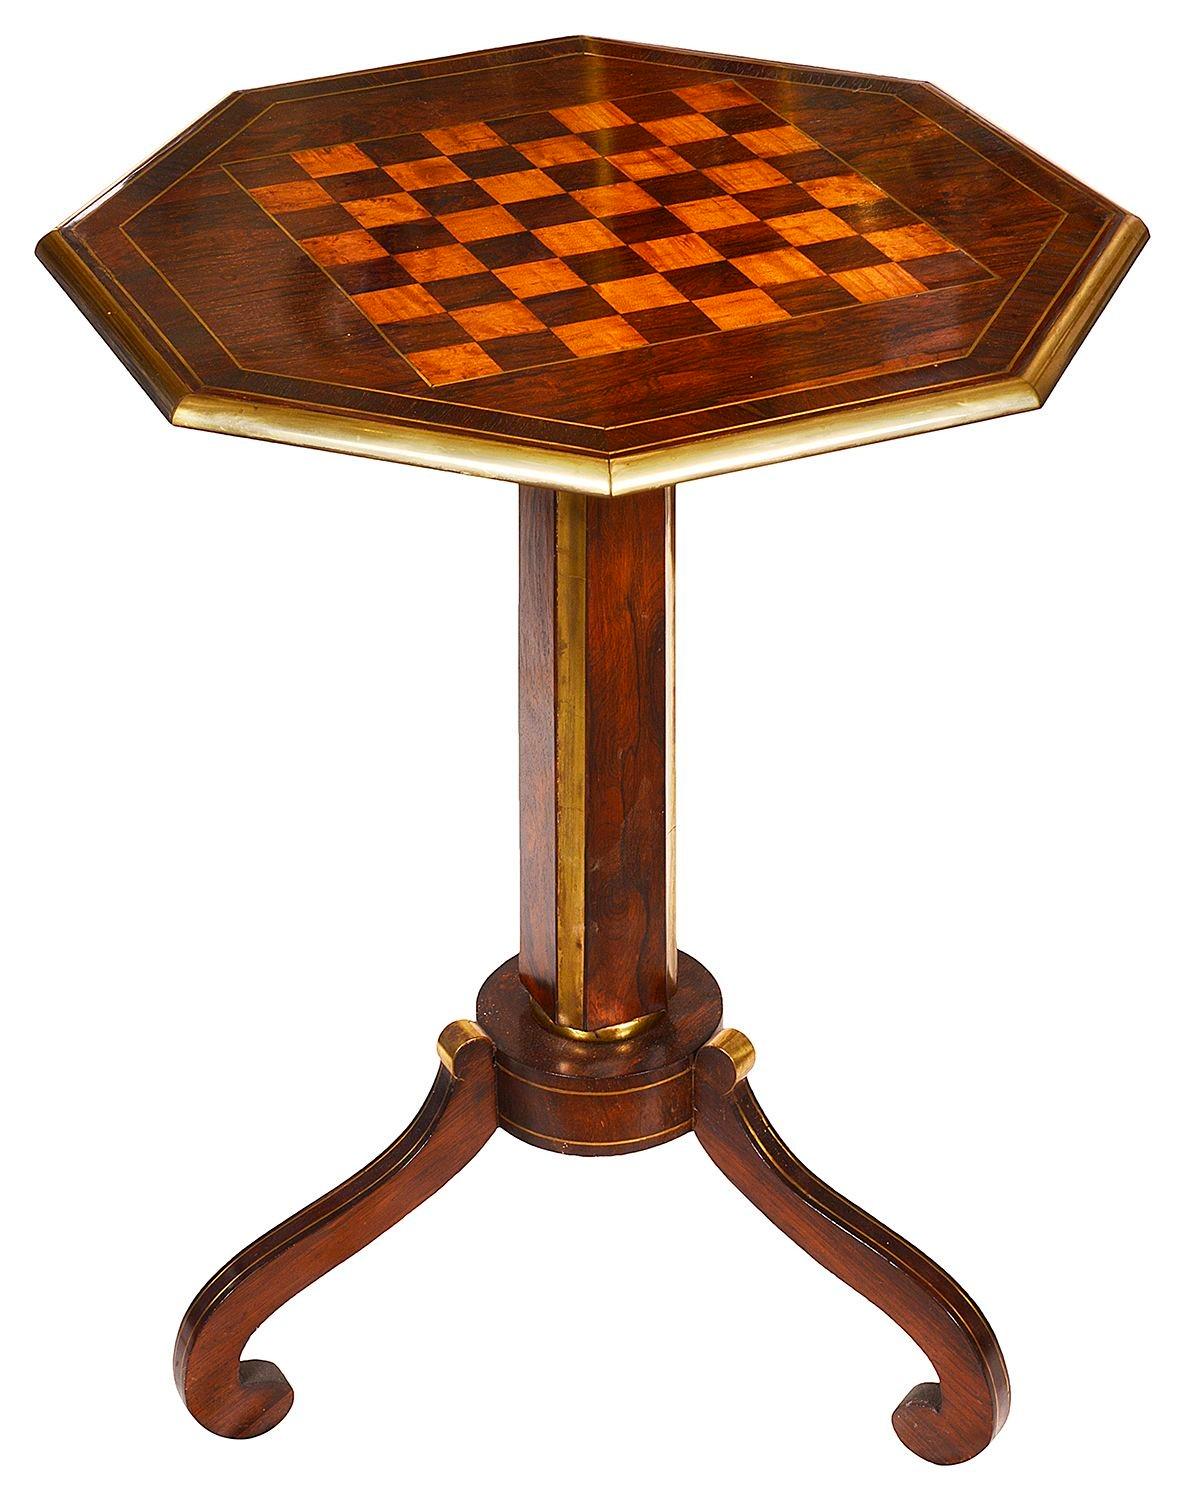 A fine quality Regency period Rosewood and Satinwood inlaid chess table, raised on a square section pedestal with canted brass mounted corners, raised on three elegant scrolling supports.

Batch 71 G9821/22. YNKZ